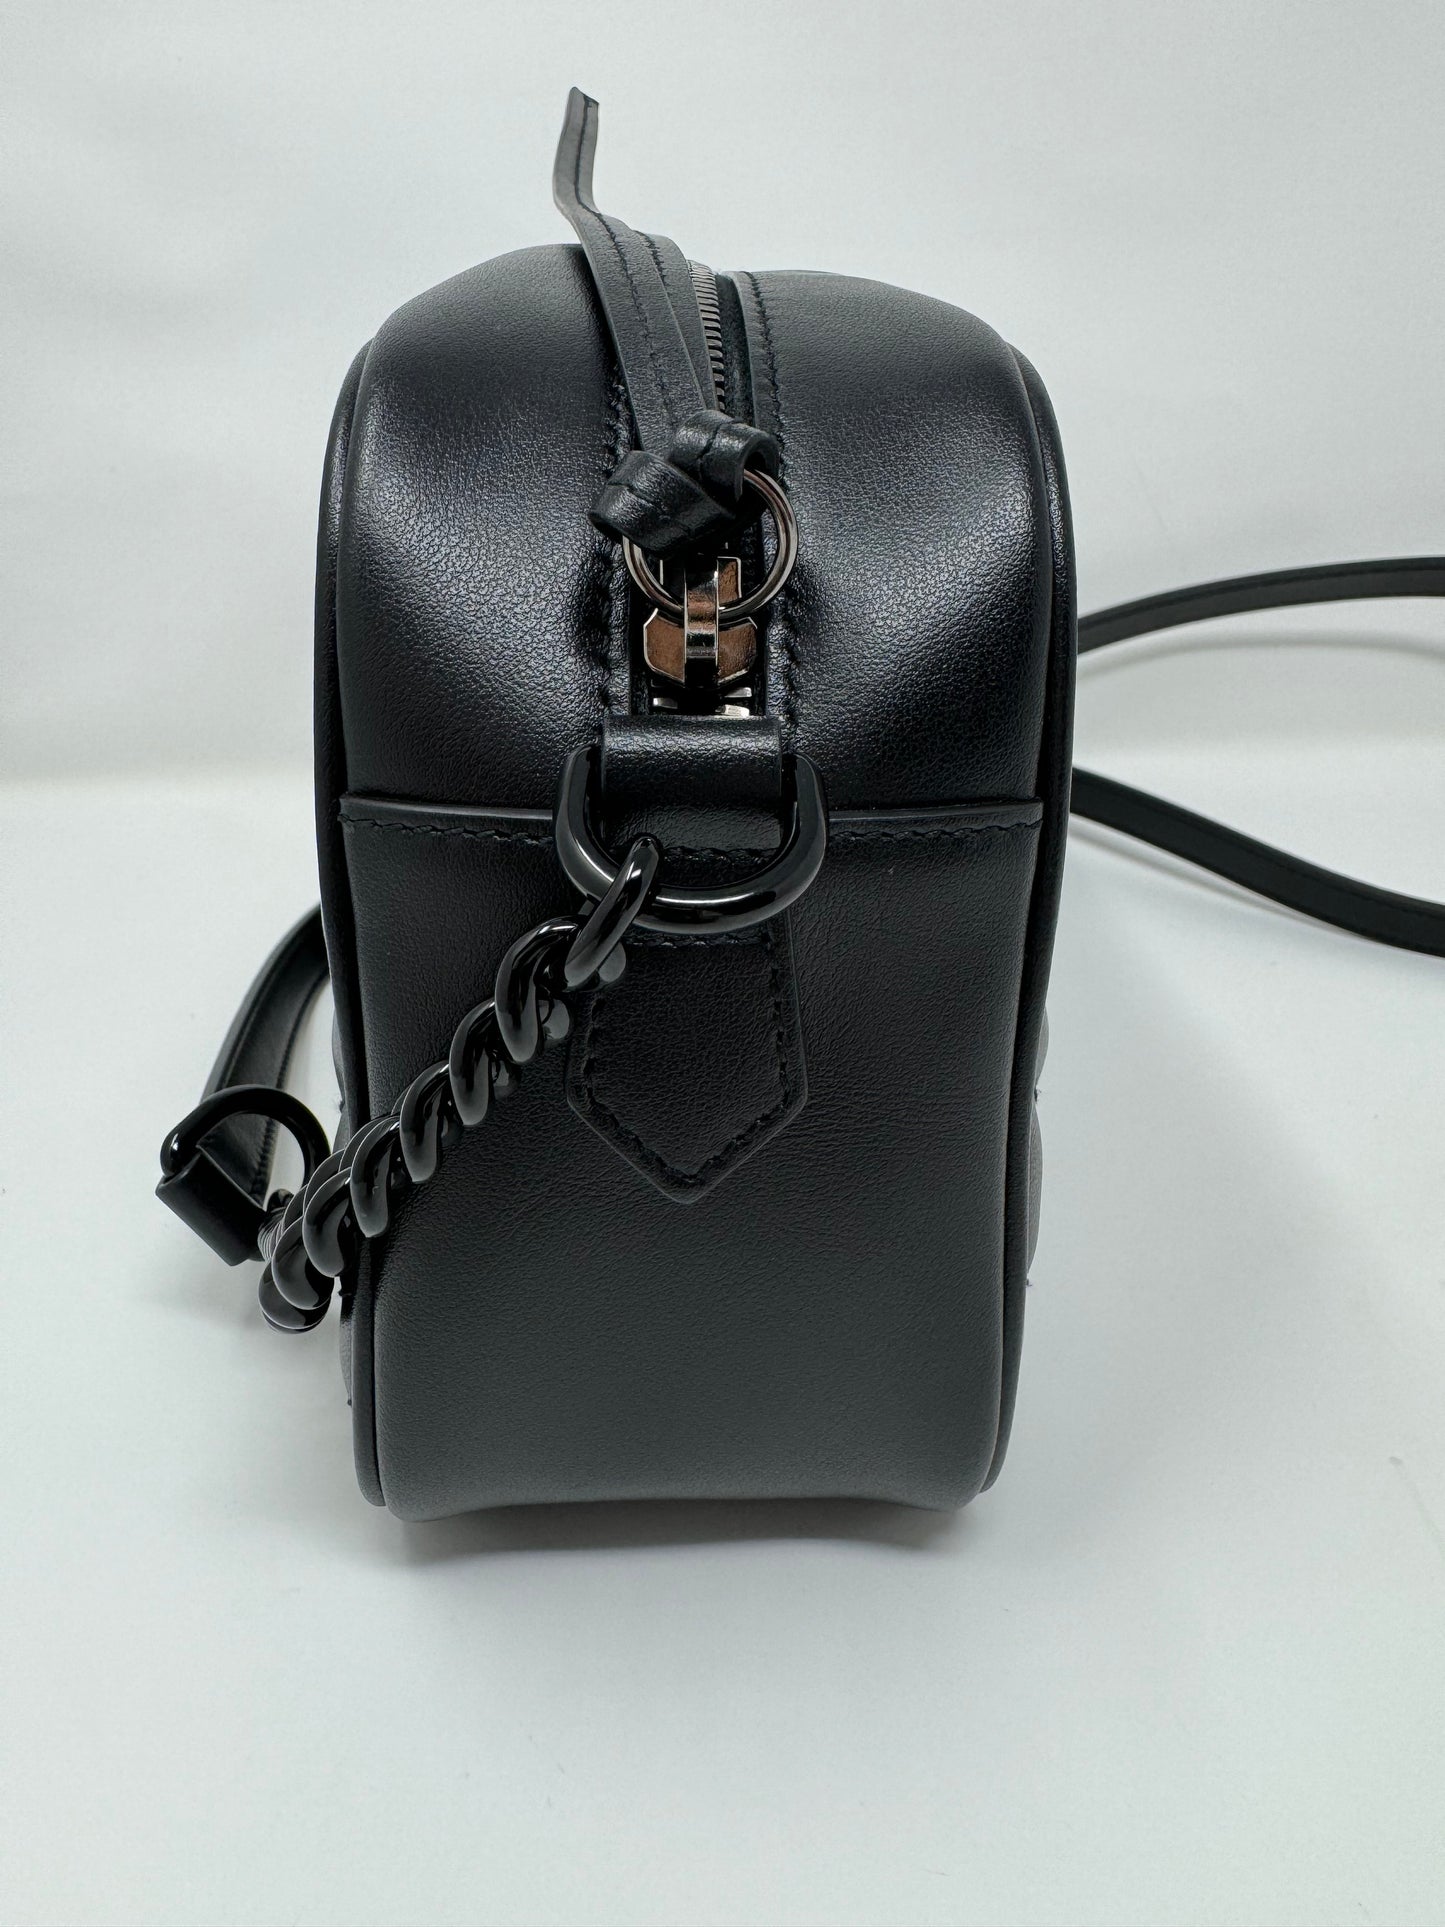 GUCCI GG MARMONT SMALL SHOULDER BAG